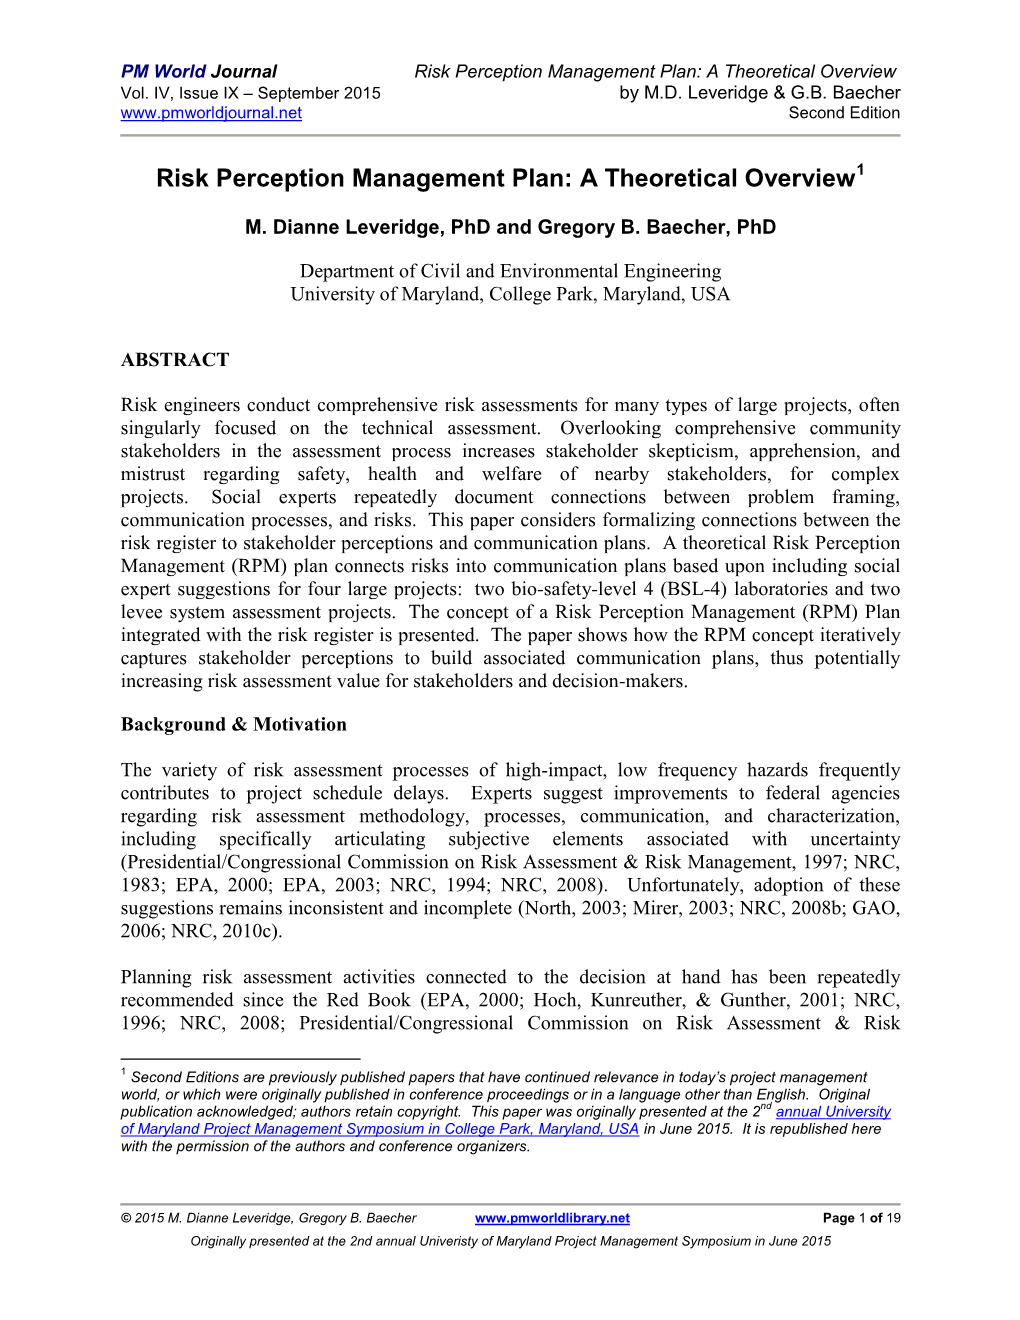 Risk Perception Management Plan: a Theoretical Overview Vol